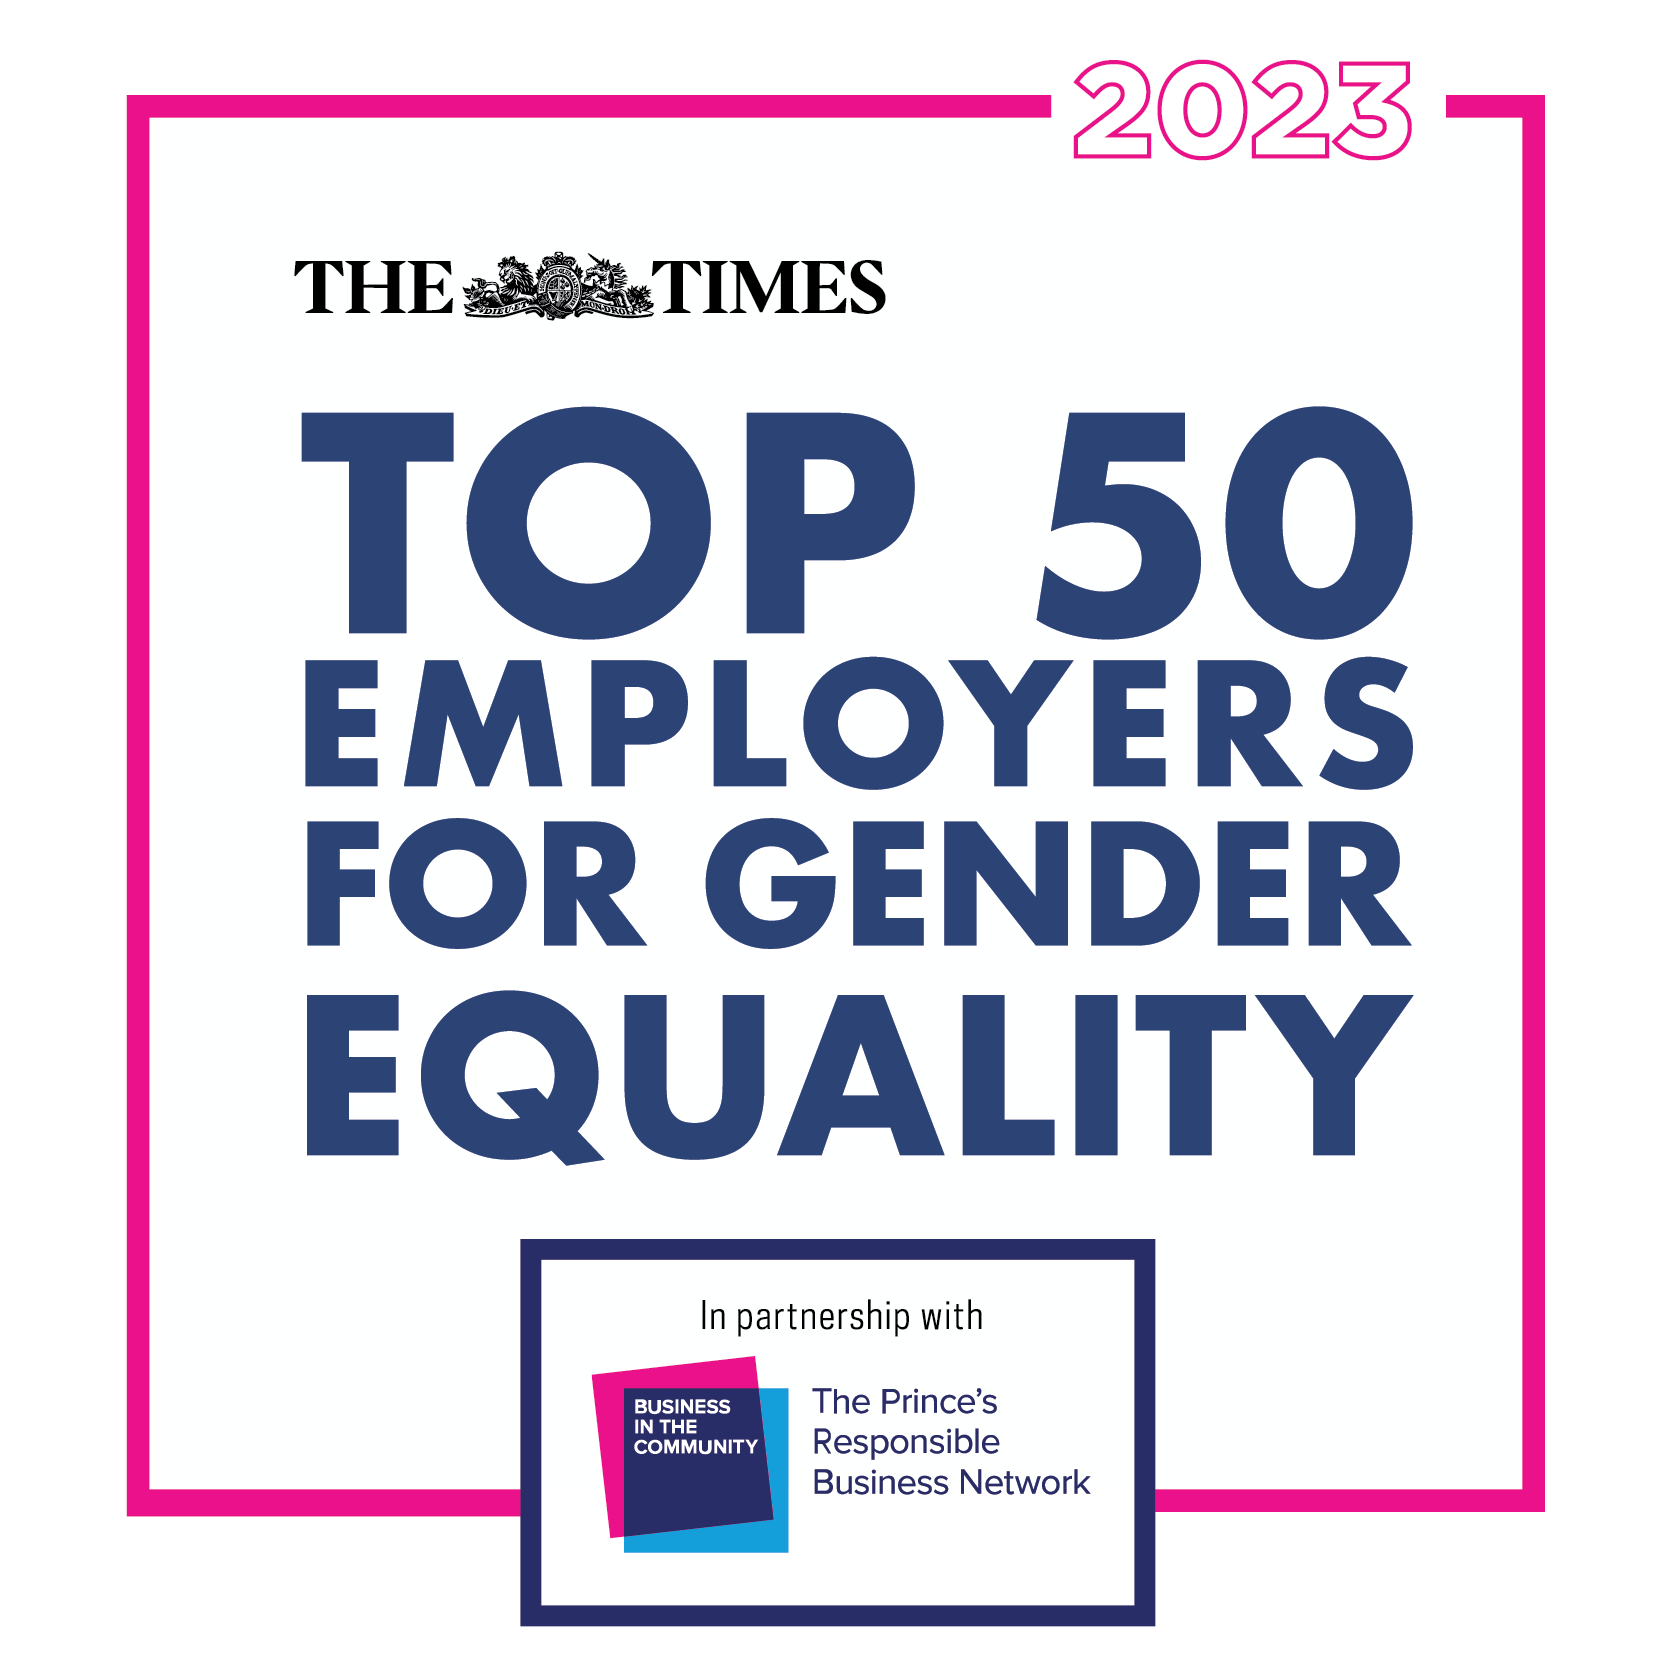 The Times Top 50 Employers for Gender Equality logo